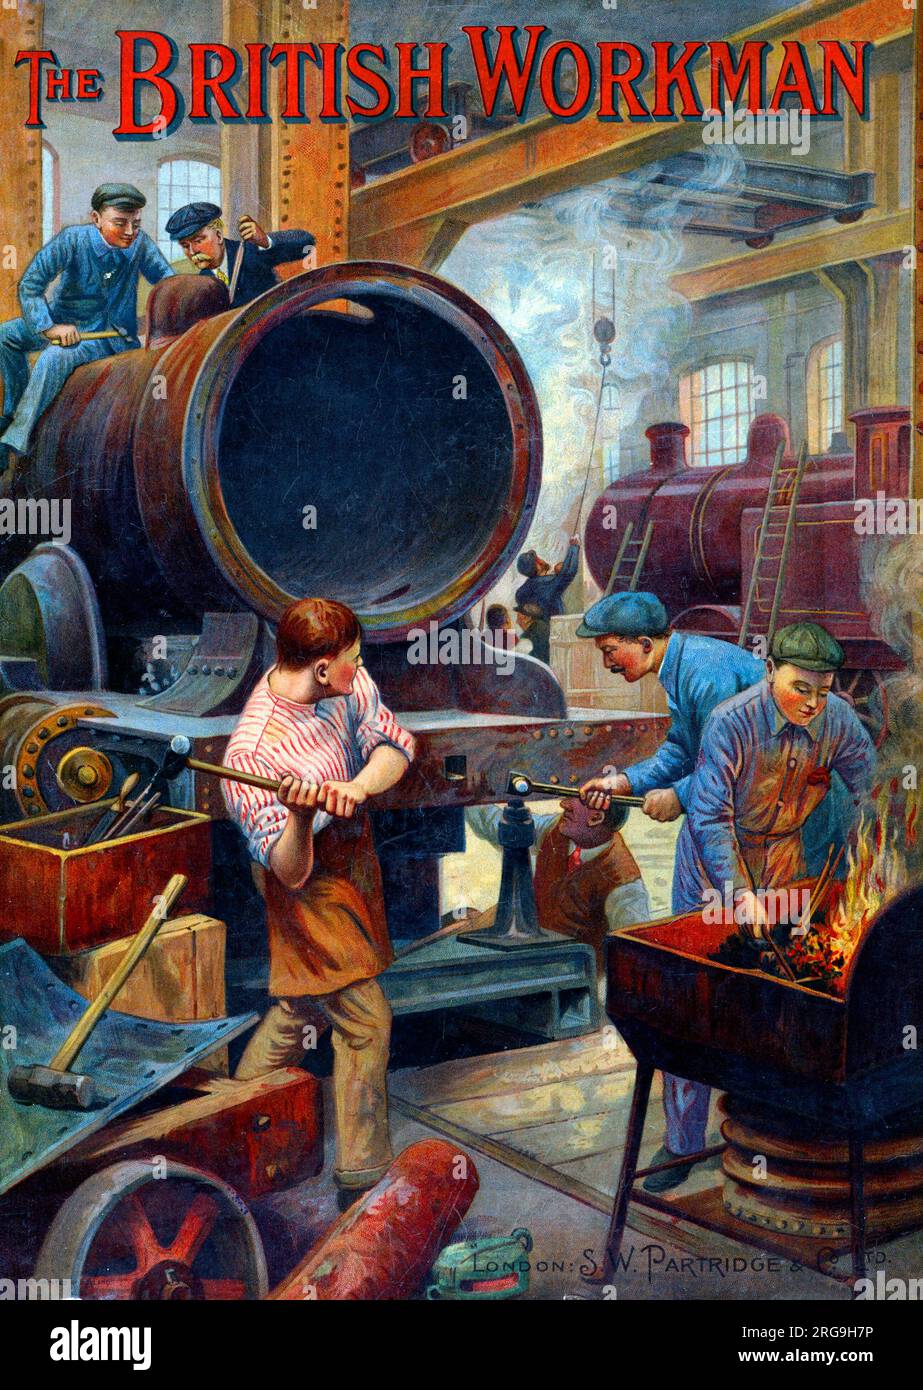 Front cover of a bound volume of The British Workman, an improving magazine for the working classes founded by Thomas Bywater Smithies in 1855, committed to encouraging temperance, protestantism, socialism and education. Image shows a railway works with men building a steam engine. Stock Photo